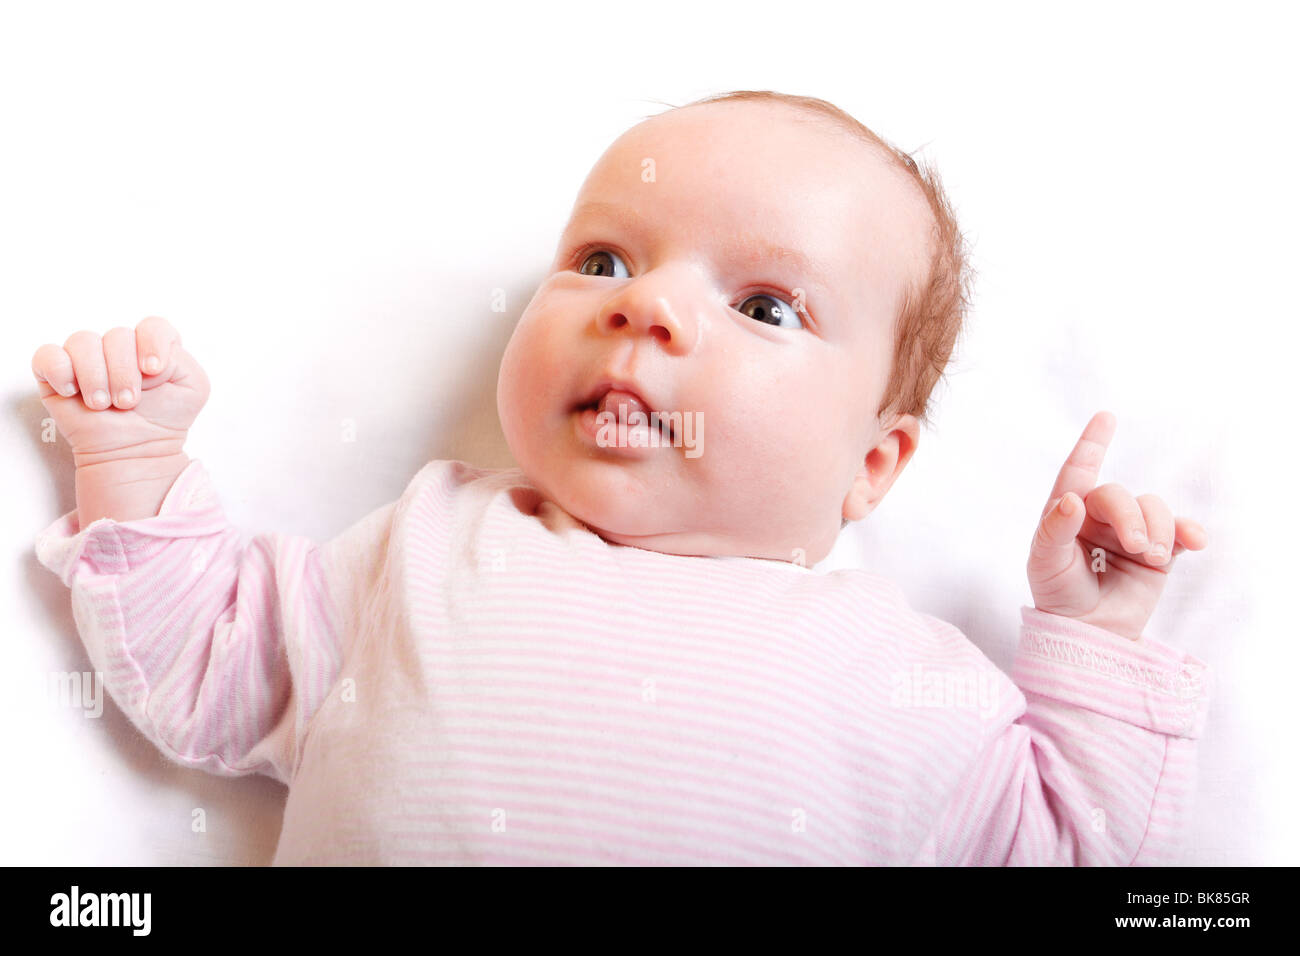 A nice small baby curiously looking around Stock Photo